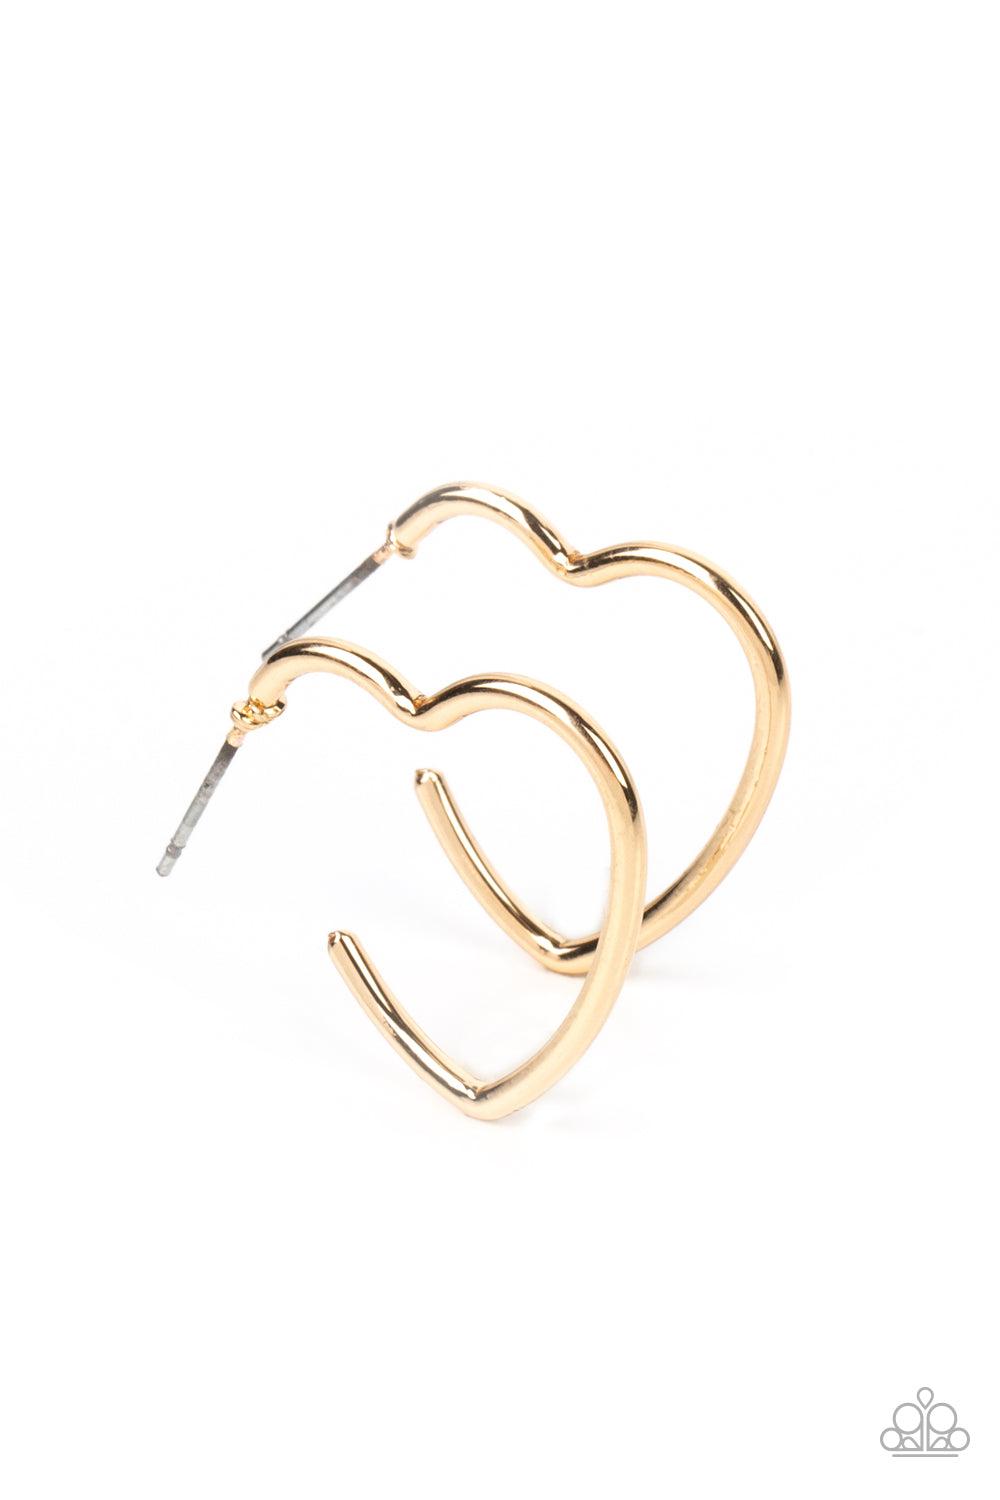 Burnished Beau Gold Heart Hoop Earrings - Paparazzi Accessories- lightbox - CarasShop.com - $5 Jewelry by Cara Jewels